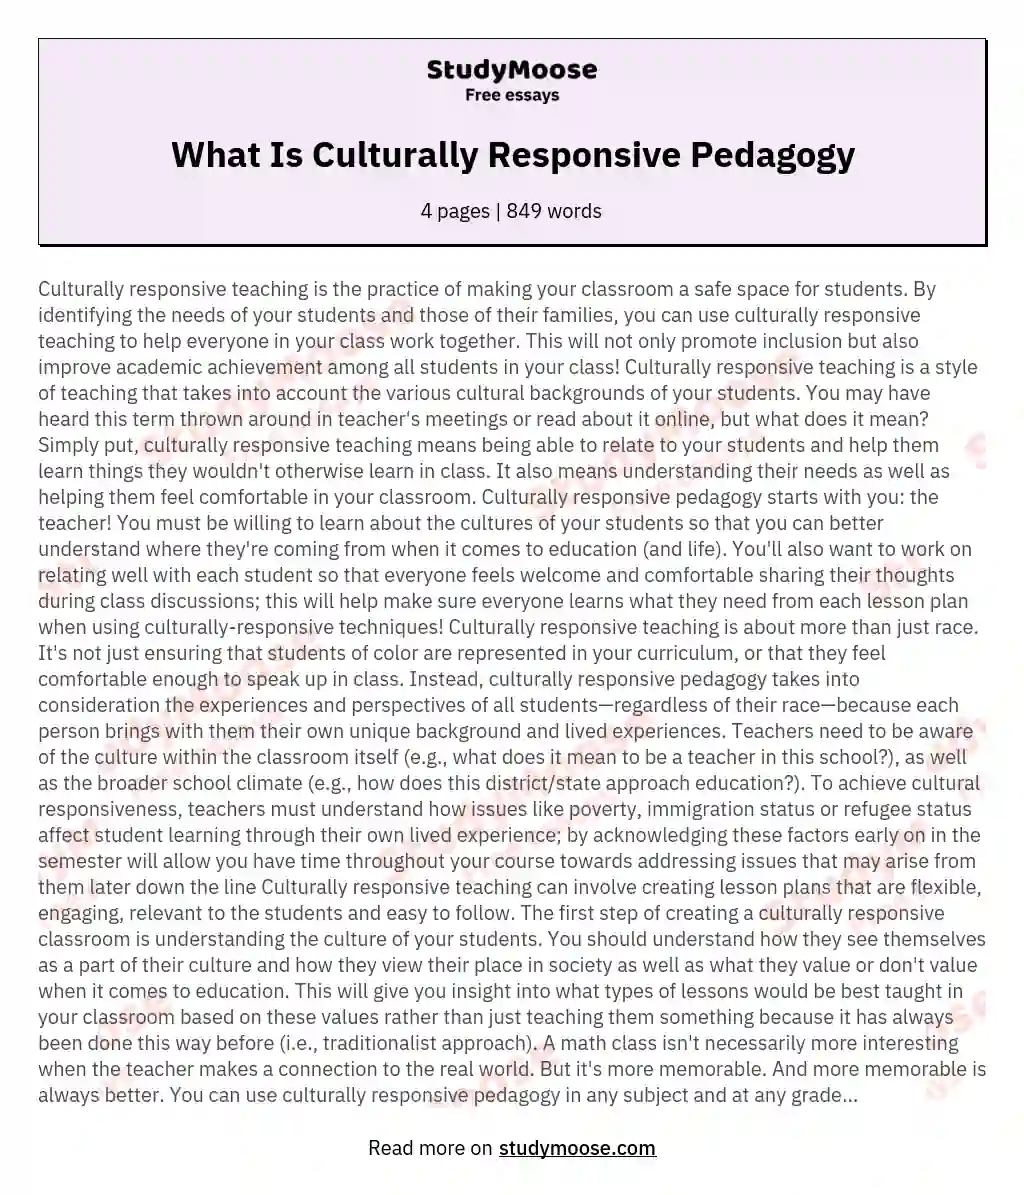 What Is Culturally Responsive Pedagogy essay